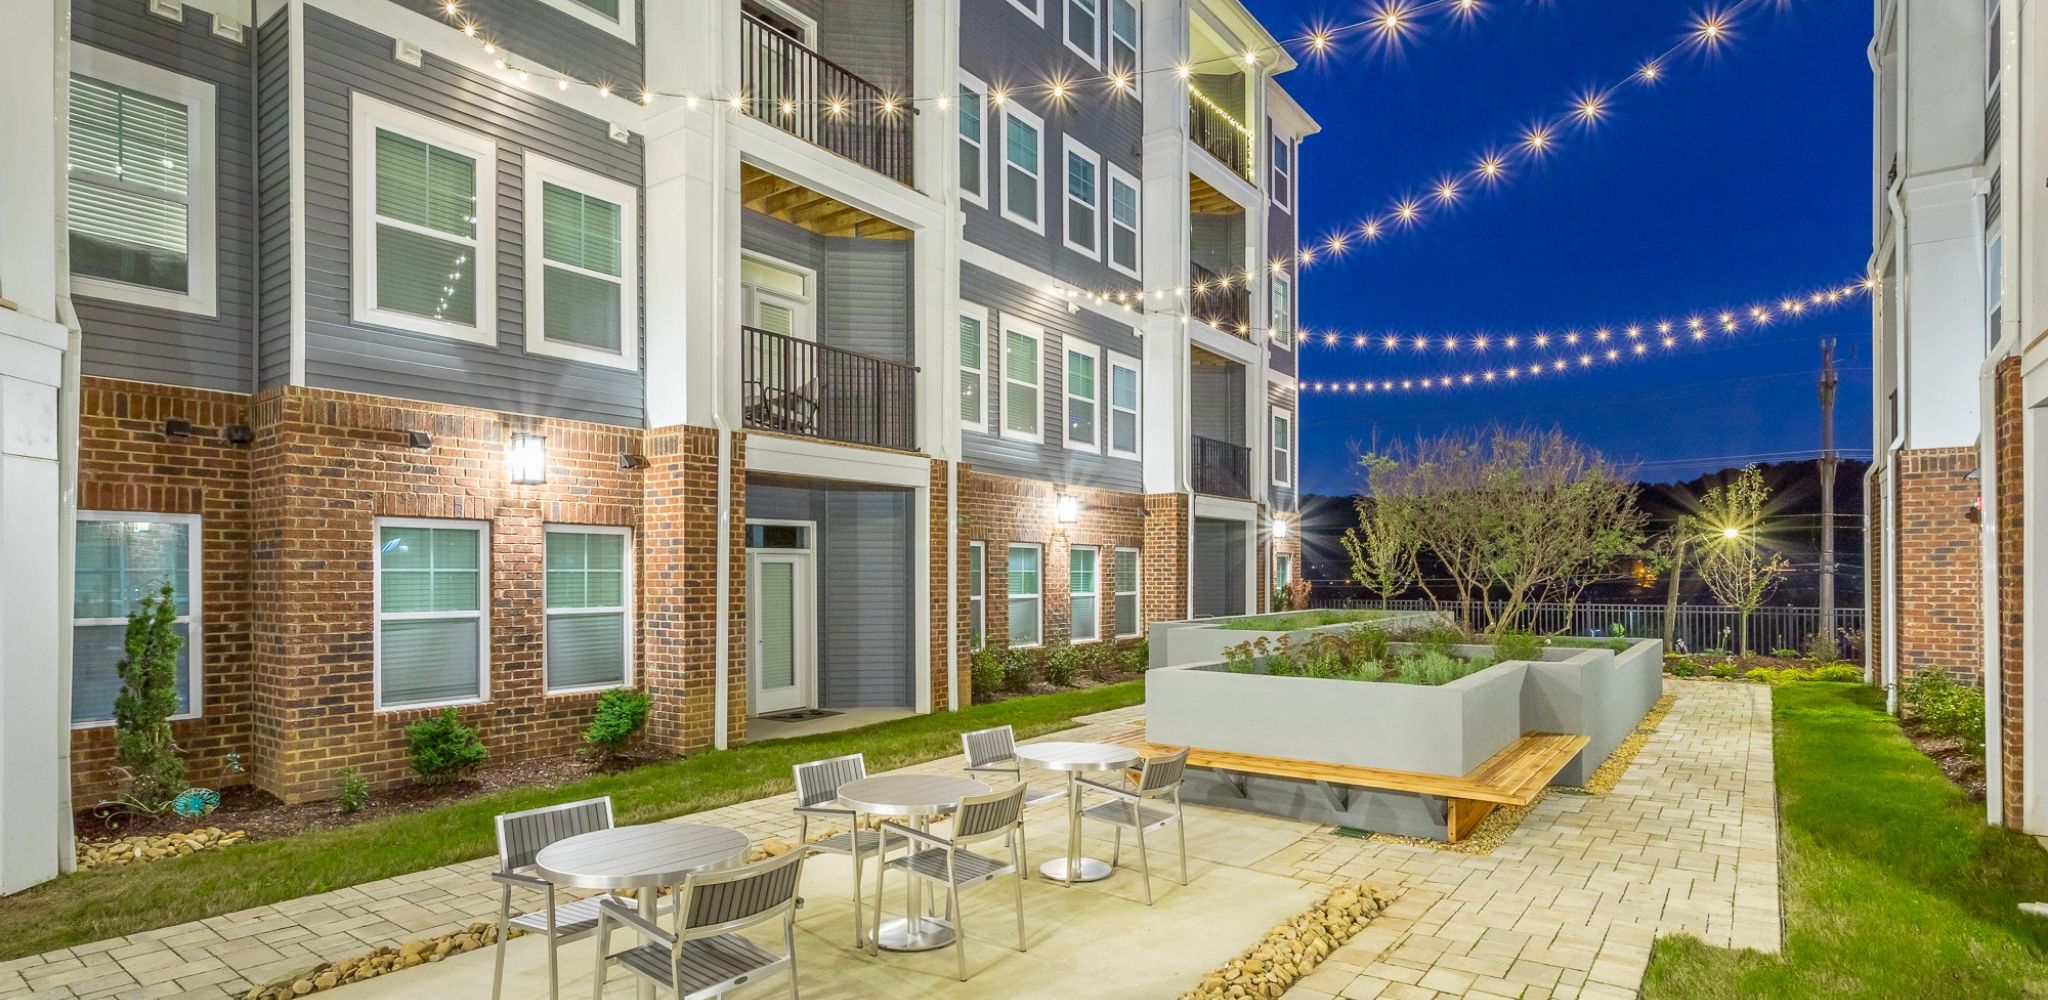 Hawthorne at the W apartments community exterior with courtyard seating, beautiful landscaping, and string lights